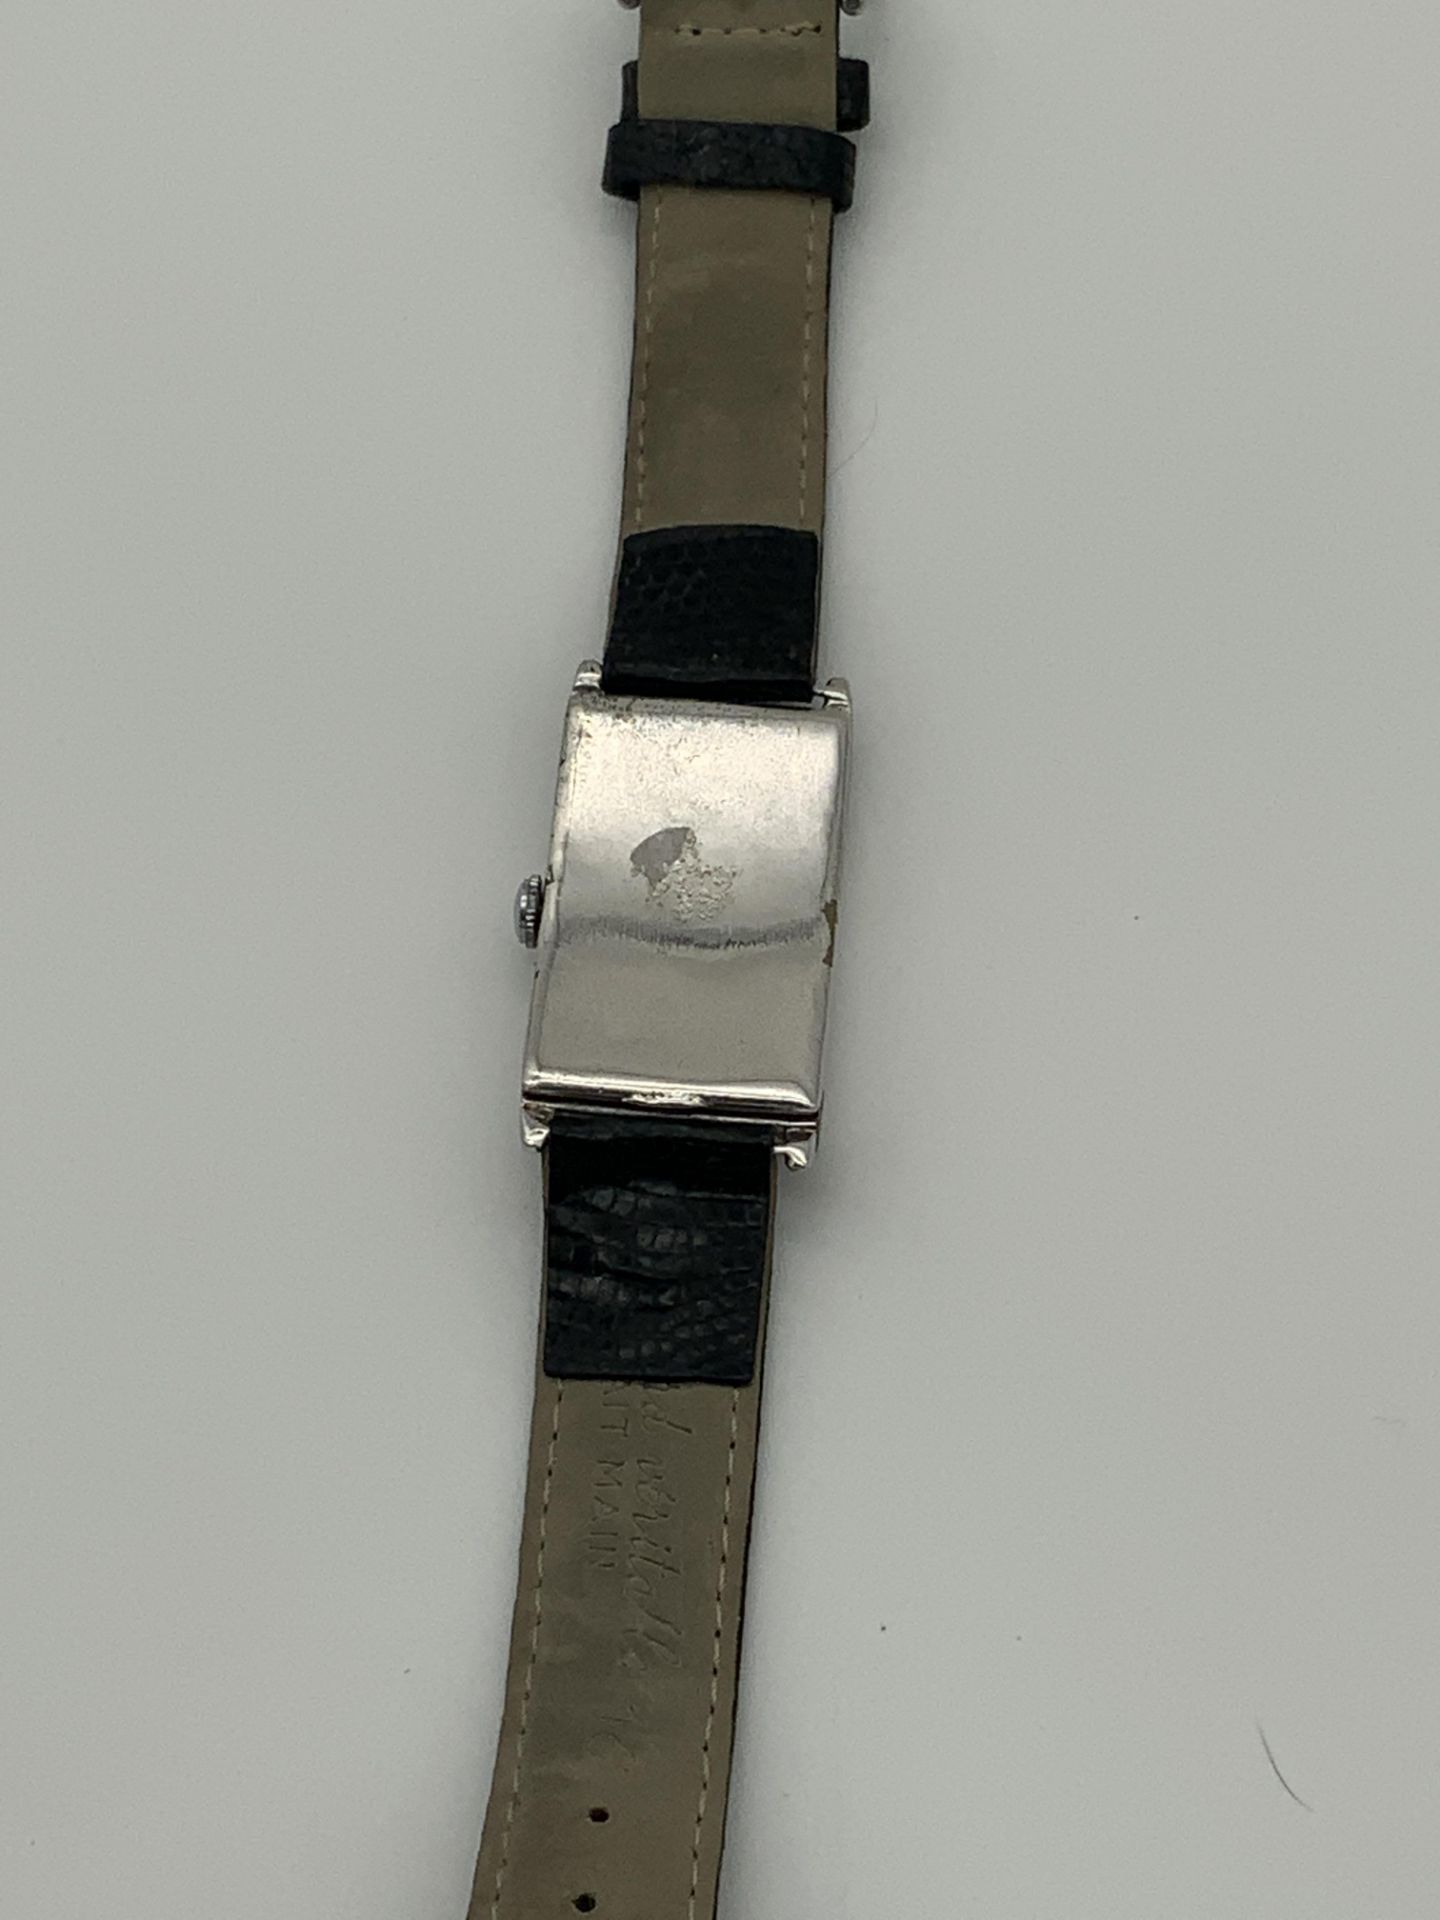 STAINLESS STEEL LIP WATCH - Image 6 of 7